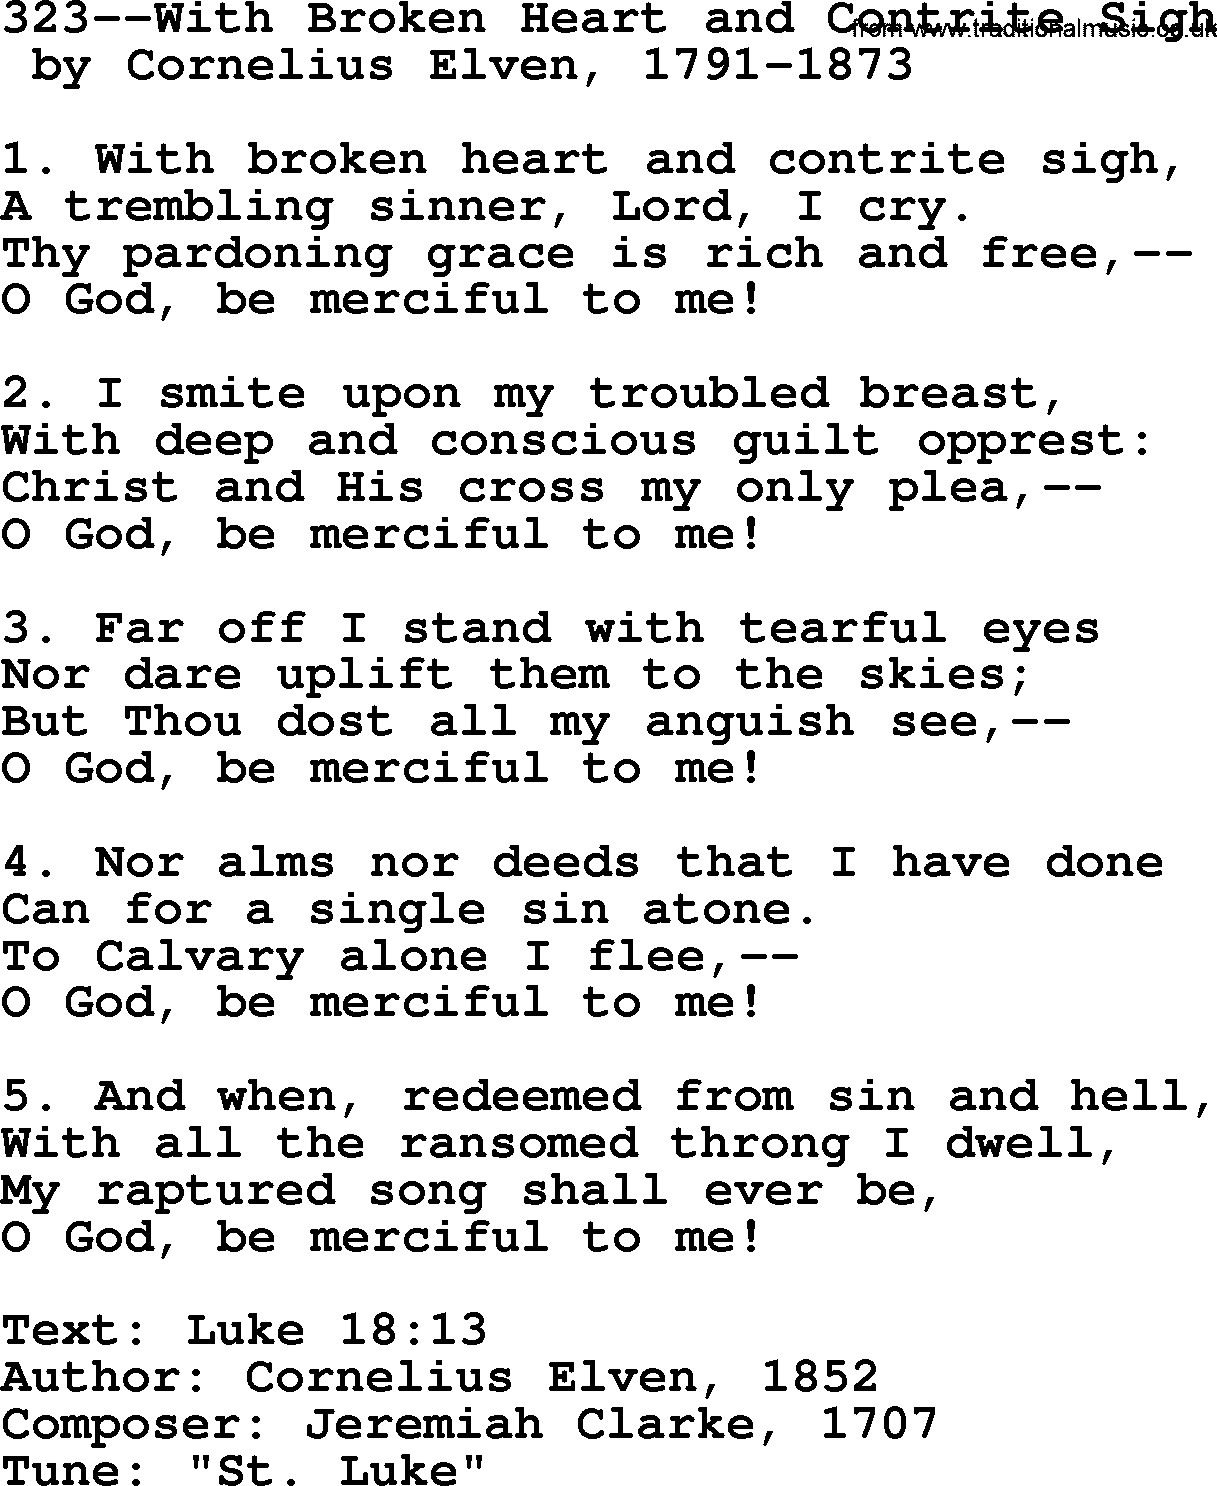 Lutheran Hymn: 323--With Broken Heart and Contrite Sigh.txt lyrics with PDF